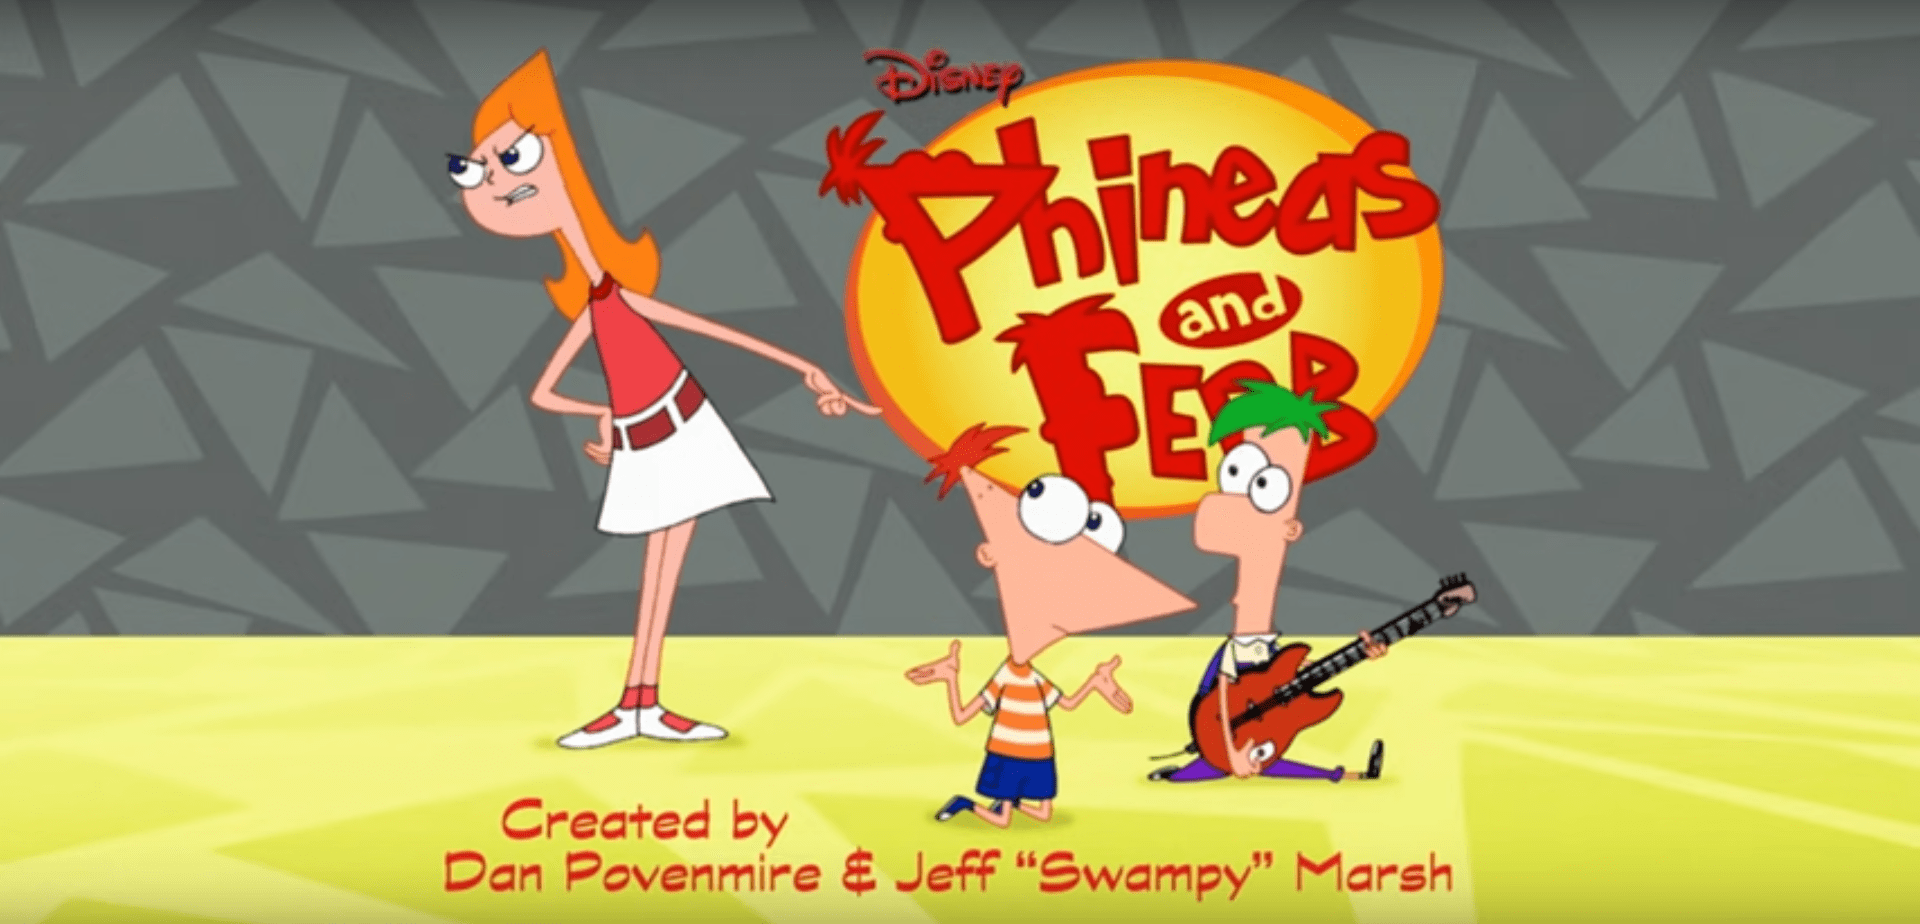 Phineas and Ferb tells the story of two stepbrothers who try to keep themse...